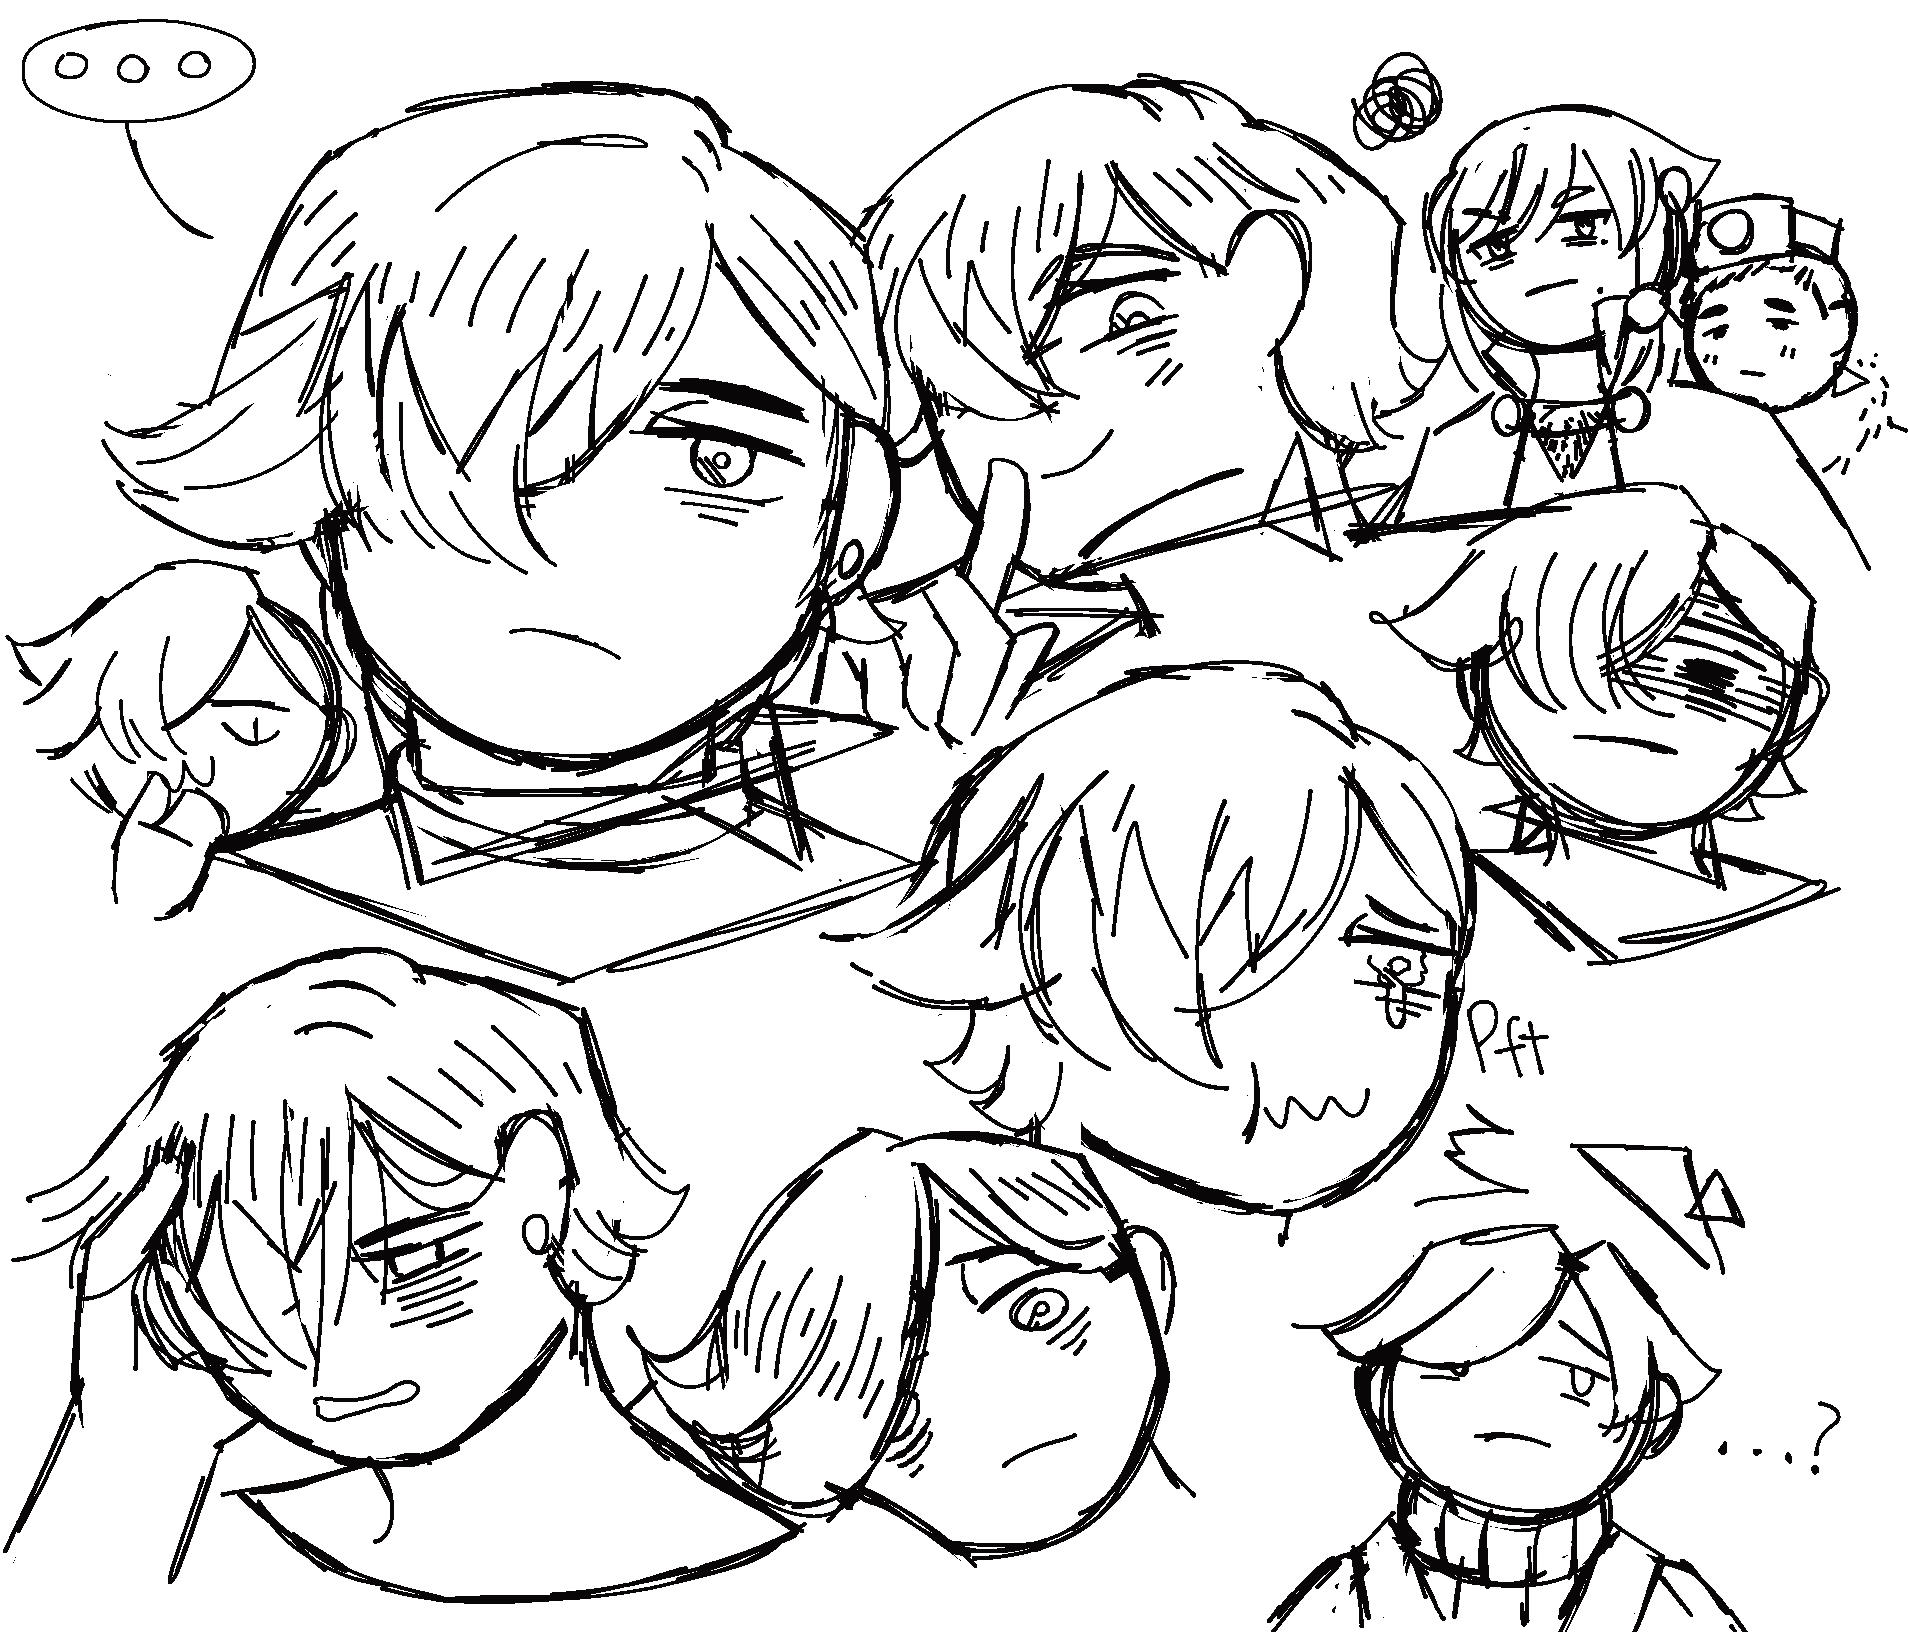 sketches of Pachypoda with different expressions and angles.